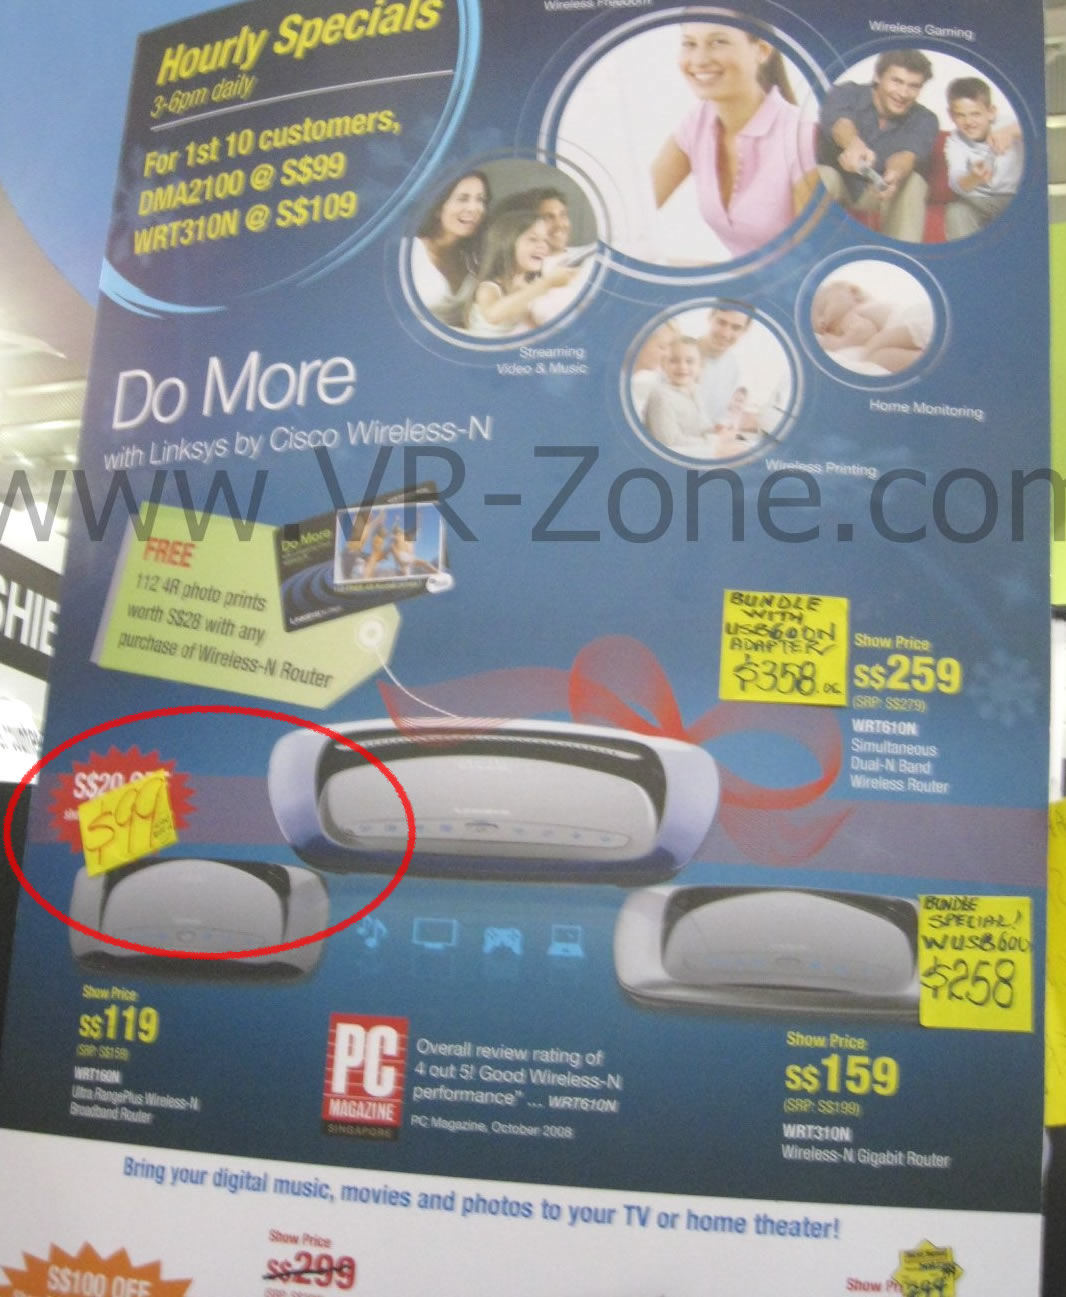 Sitex 2008 price list image brochure of (LAST DAY Deals) VR-Zone Linksys IMG 1734